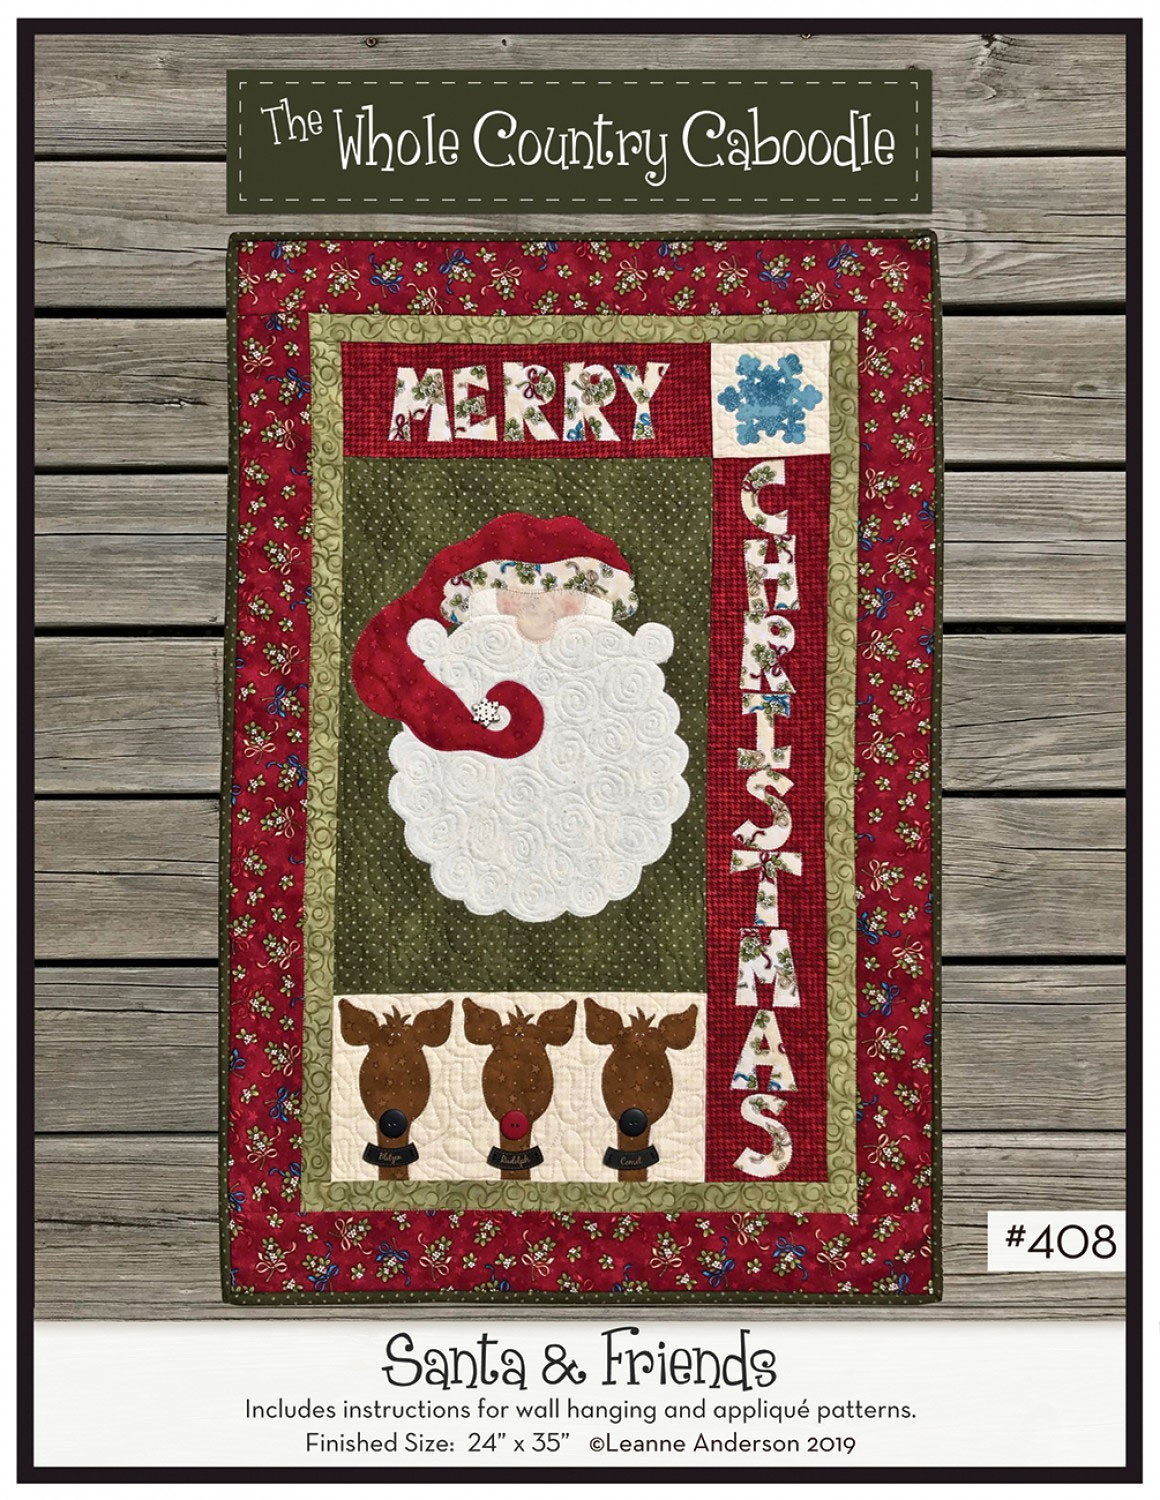 Santa-and-Friends-quilt-sewing-pattern-The-Whole-Country-Caboodle-front